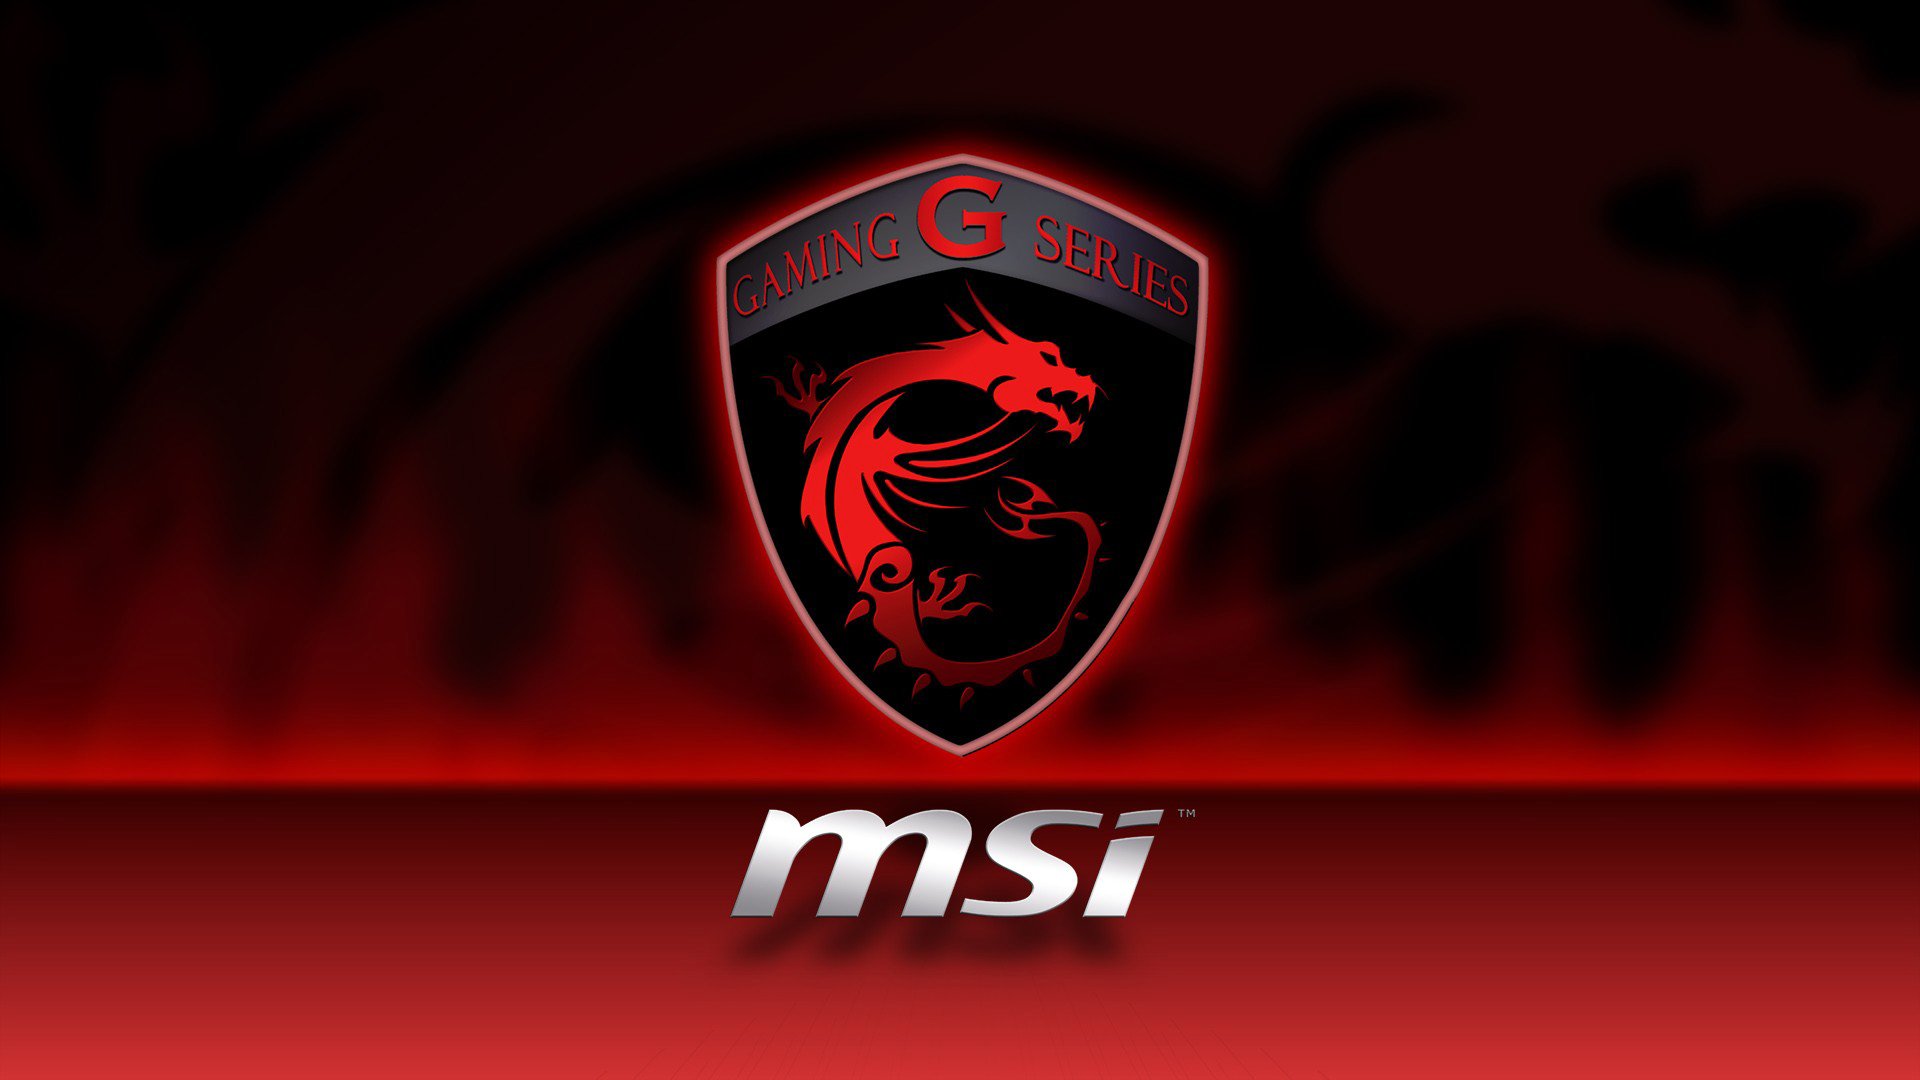 Msi Gaming Wallpaper 1920x1080 Px by Agamemmnon on DeviantArt